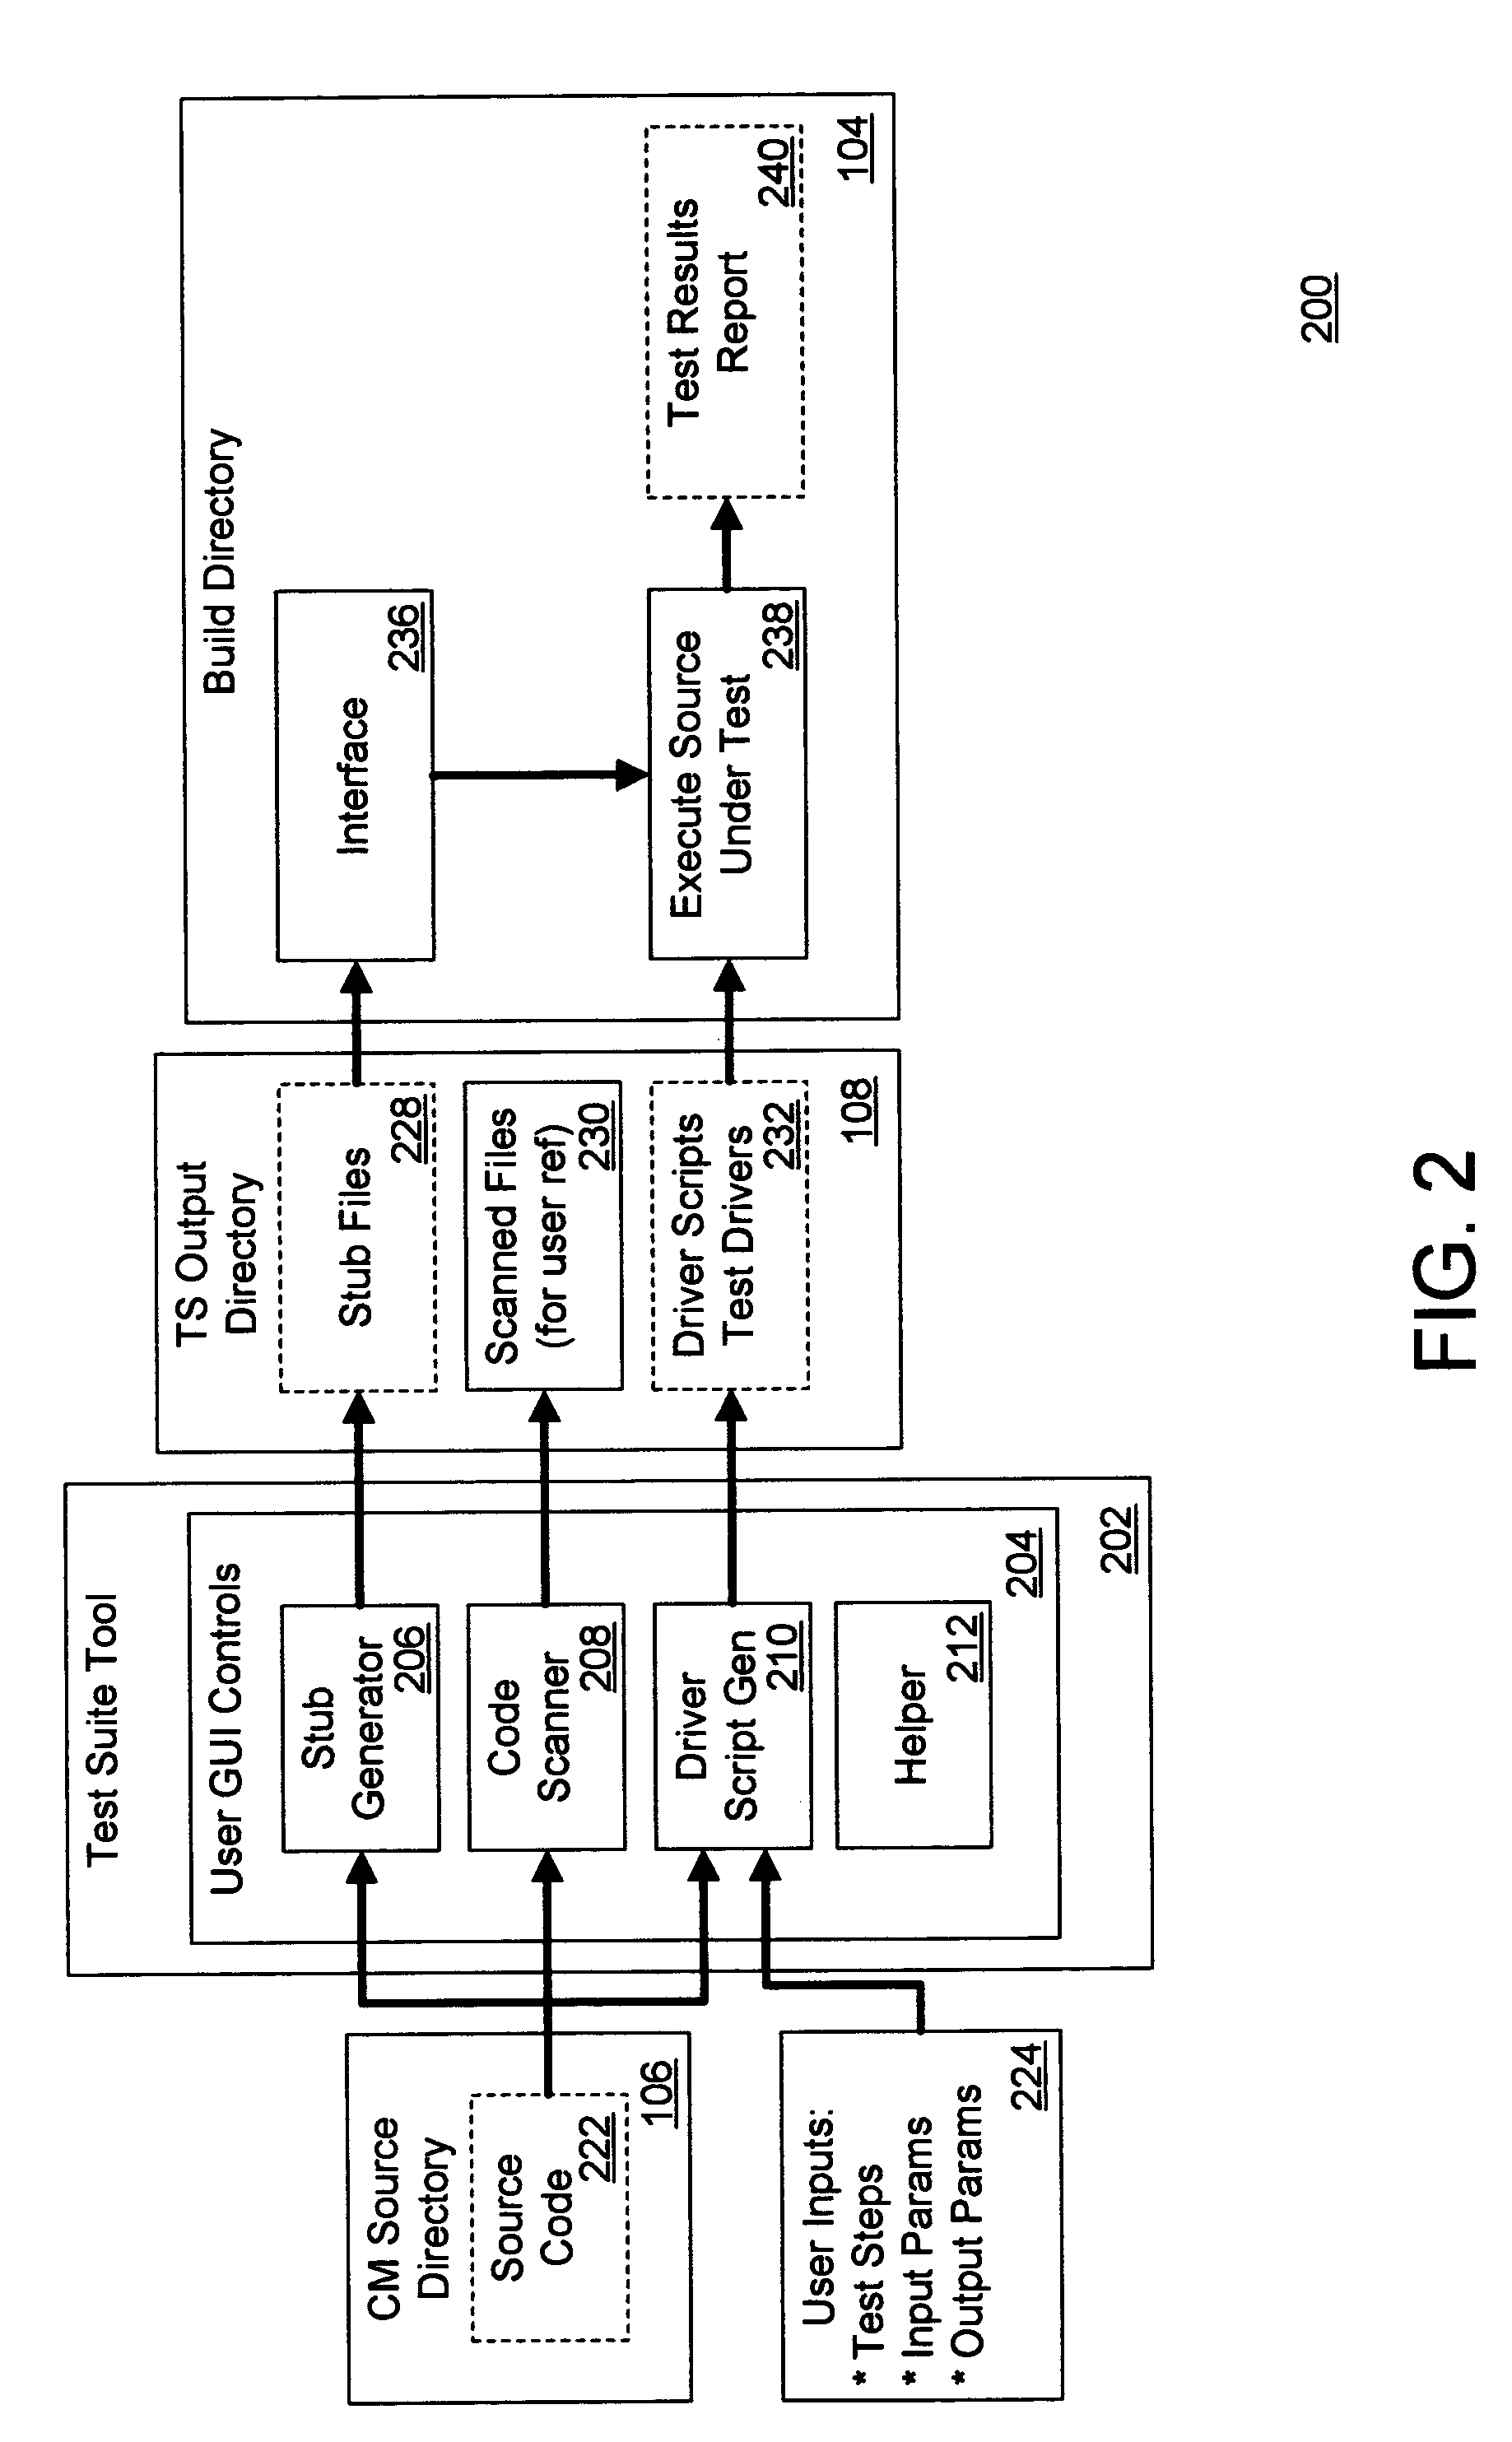 Method and system for object level software testing